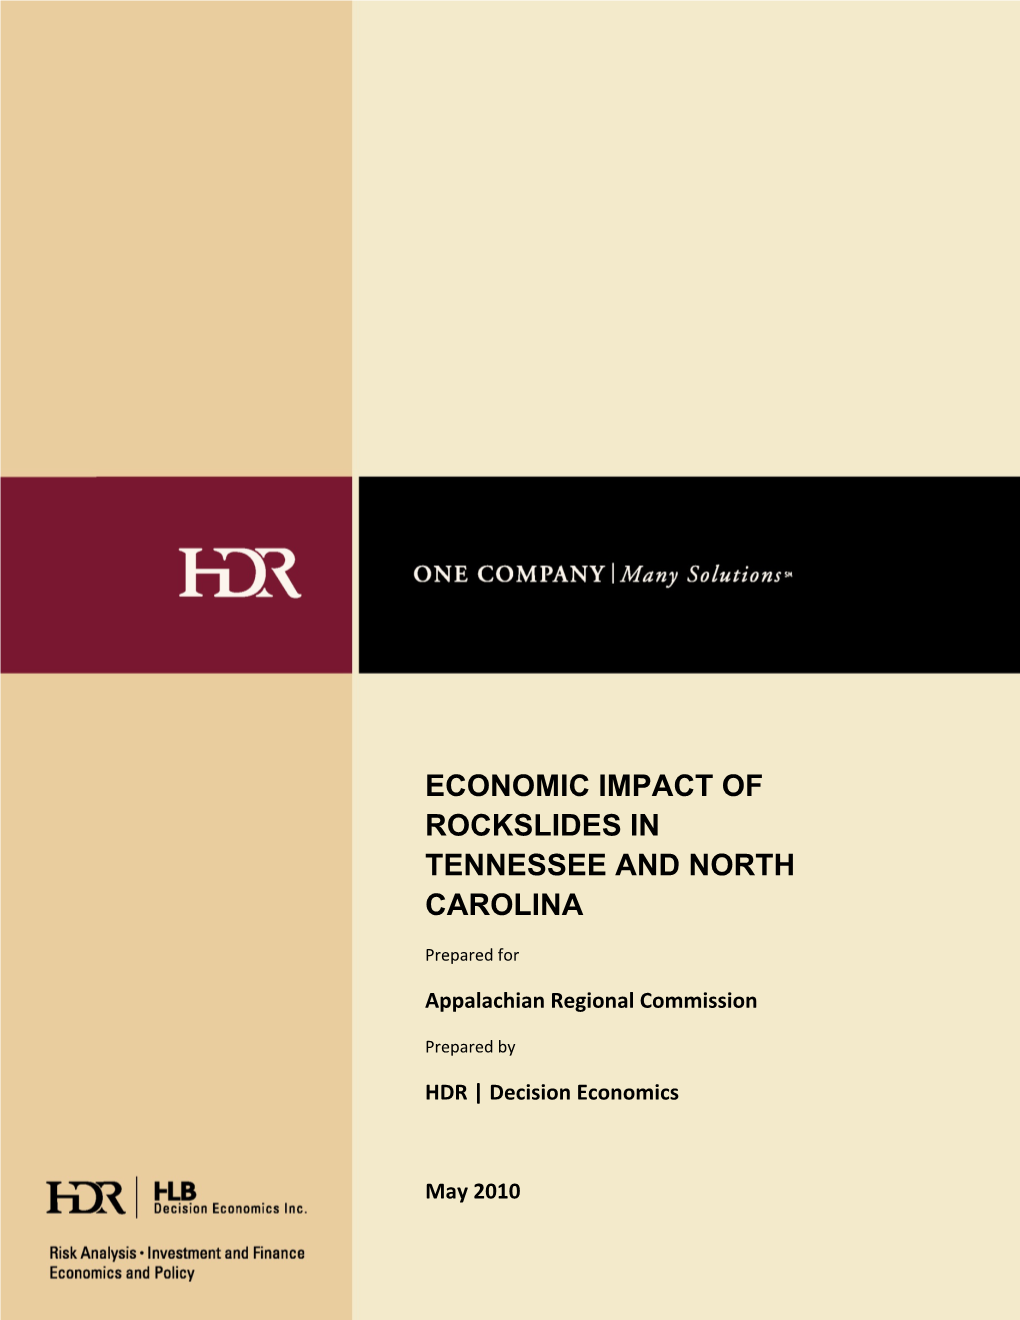 Economic Impact of Rockslides in Tennessee and North Carolina